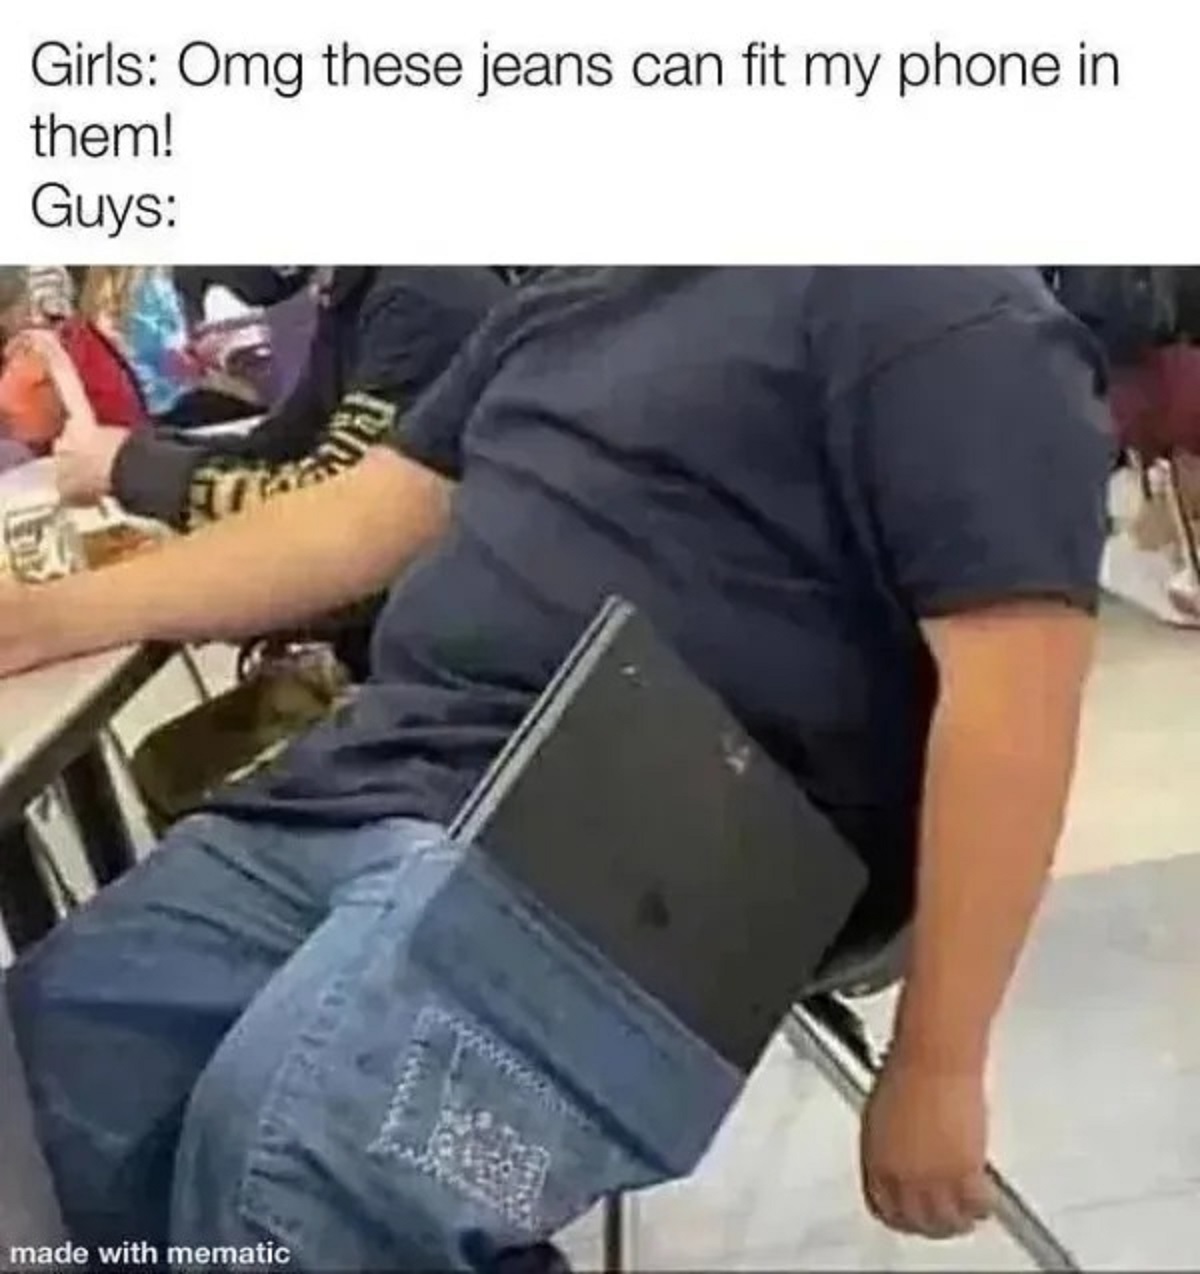 bro took it seriously - Girls Omg these jeans can fit my phone in them! Guys made with mematic Rin